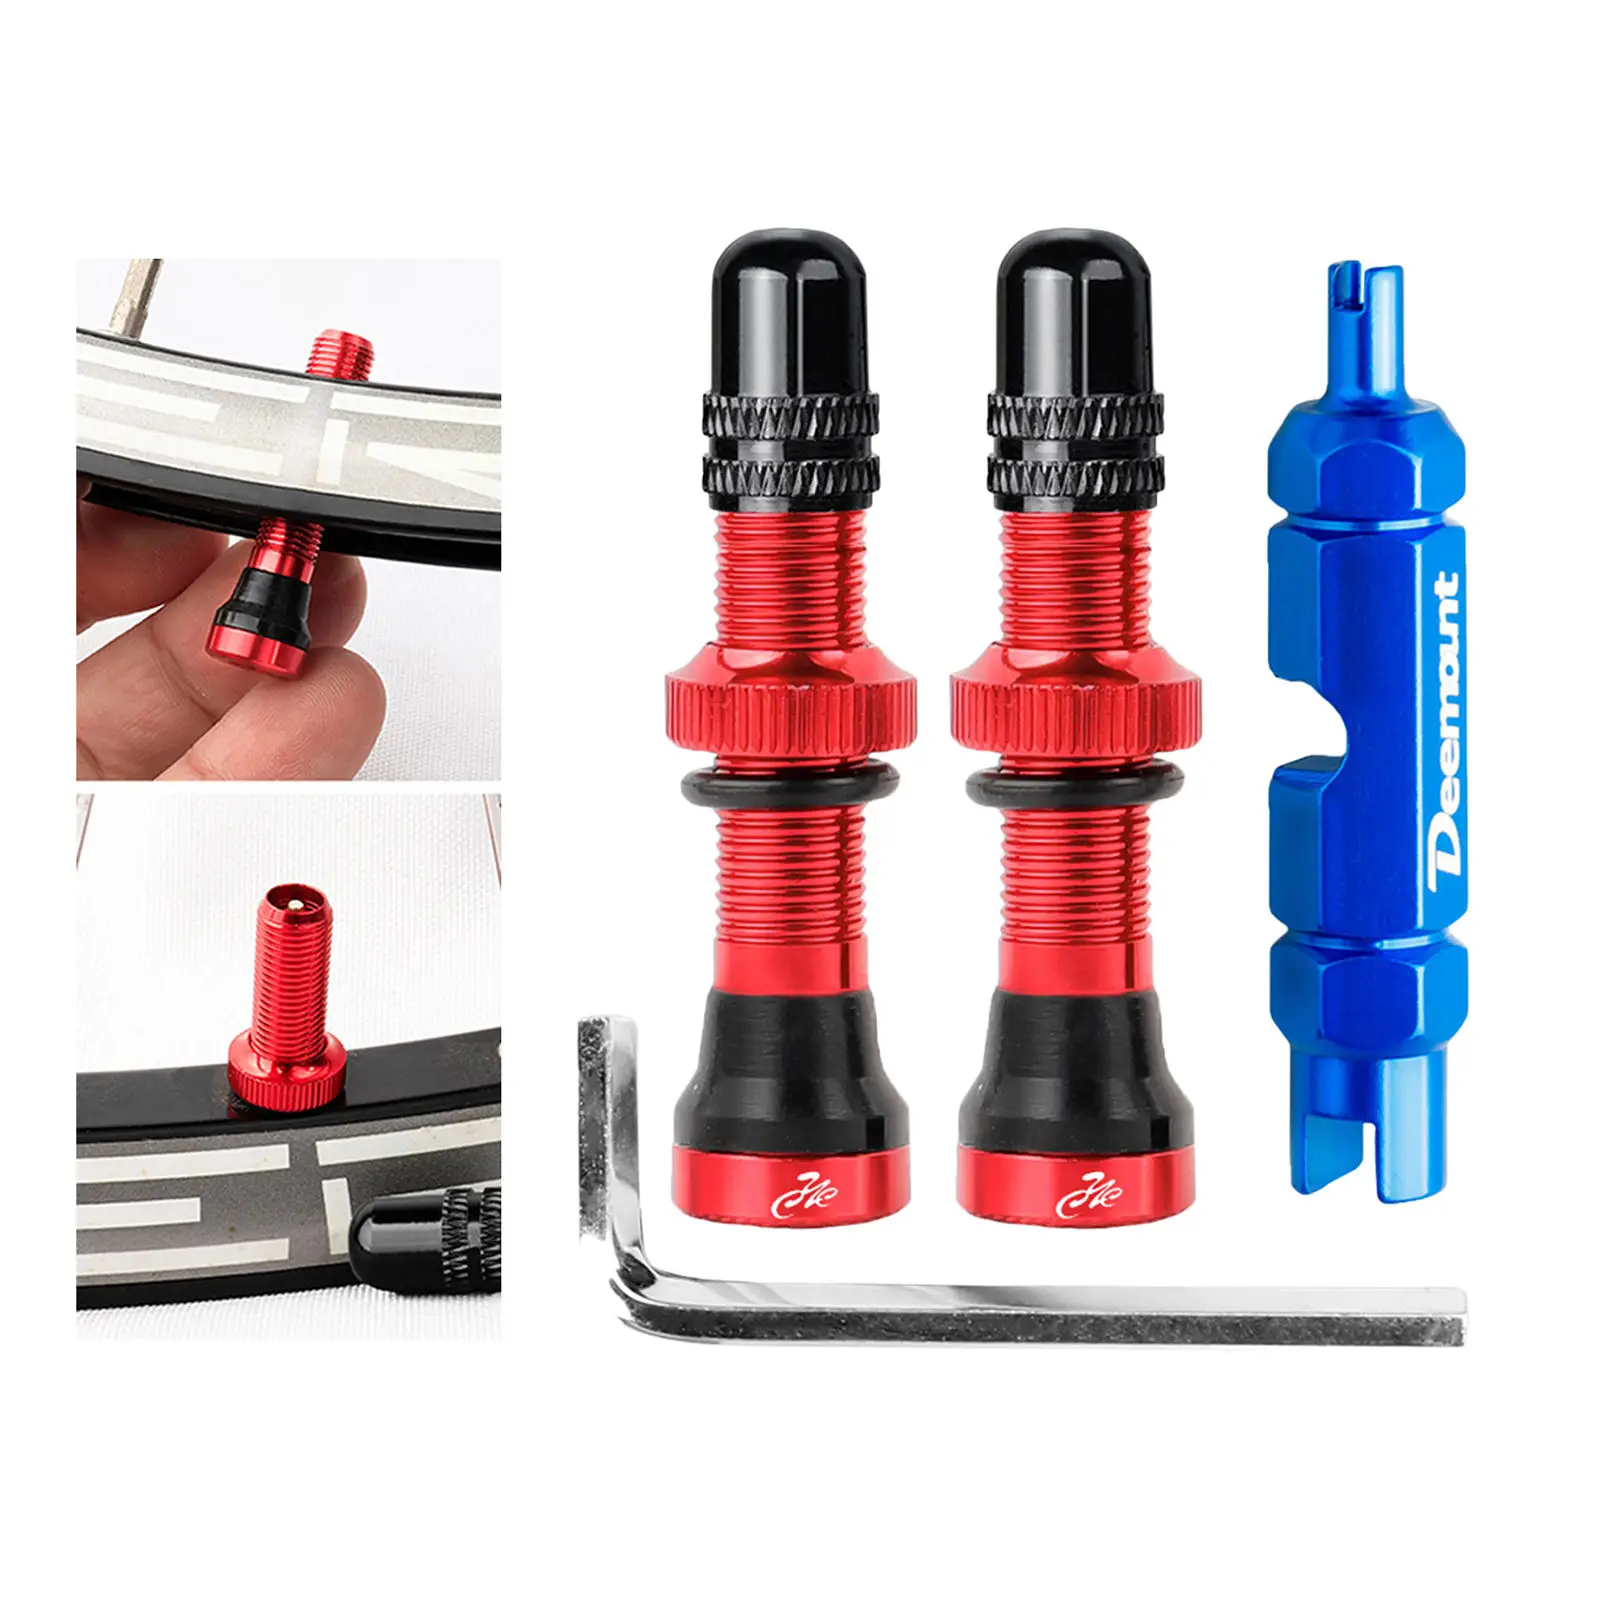 Valve Core Remover Tool Kit Bicycle Valve Core for Bike Bicycle Accessories